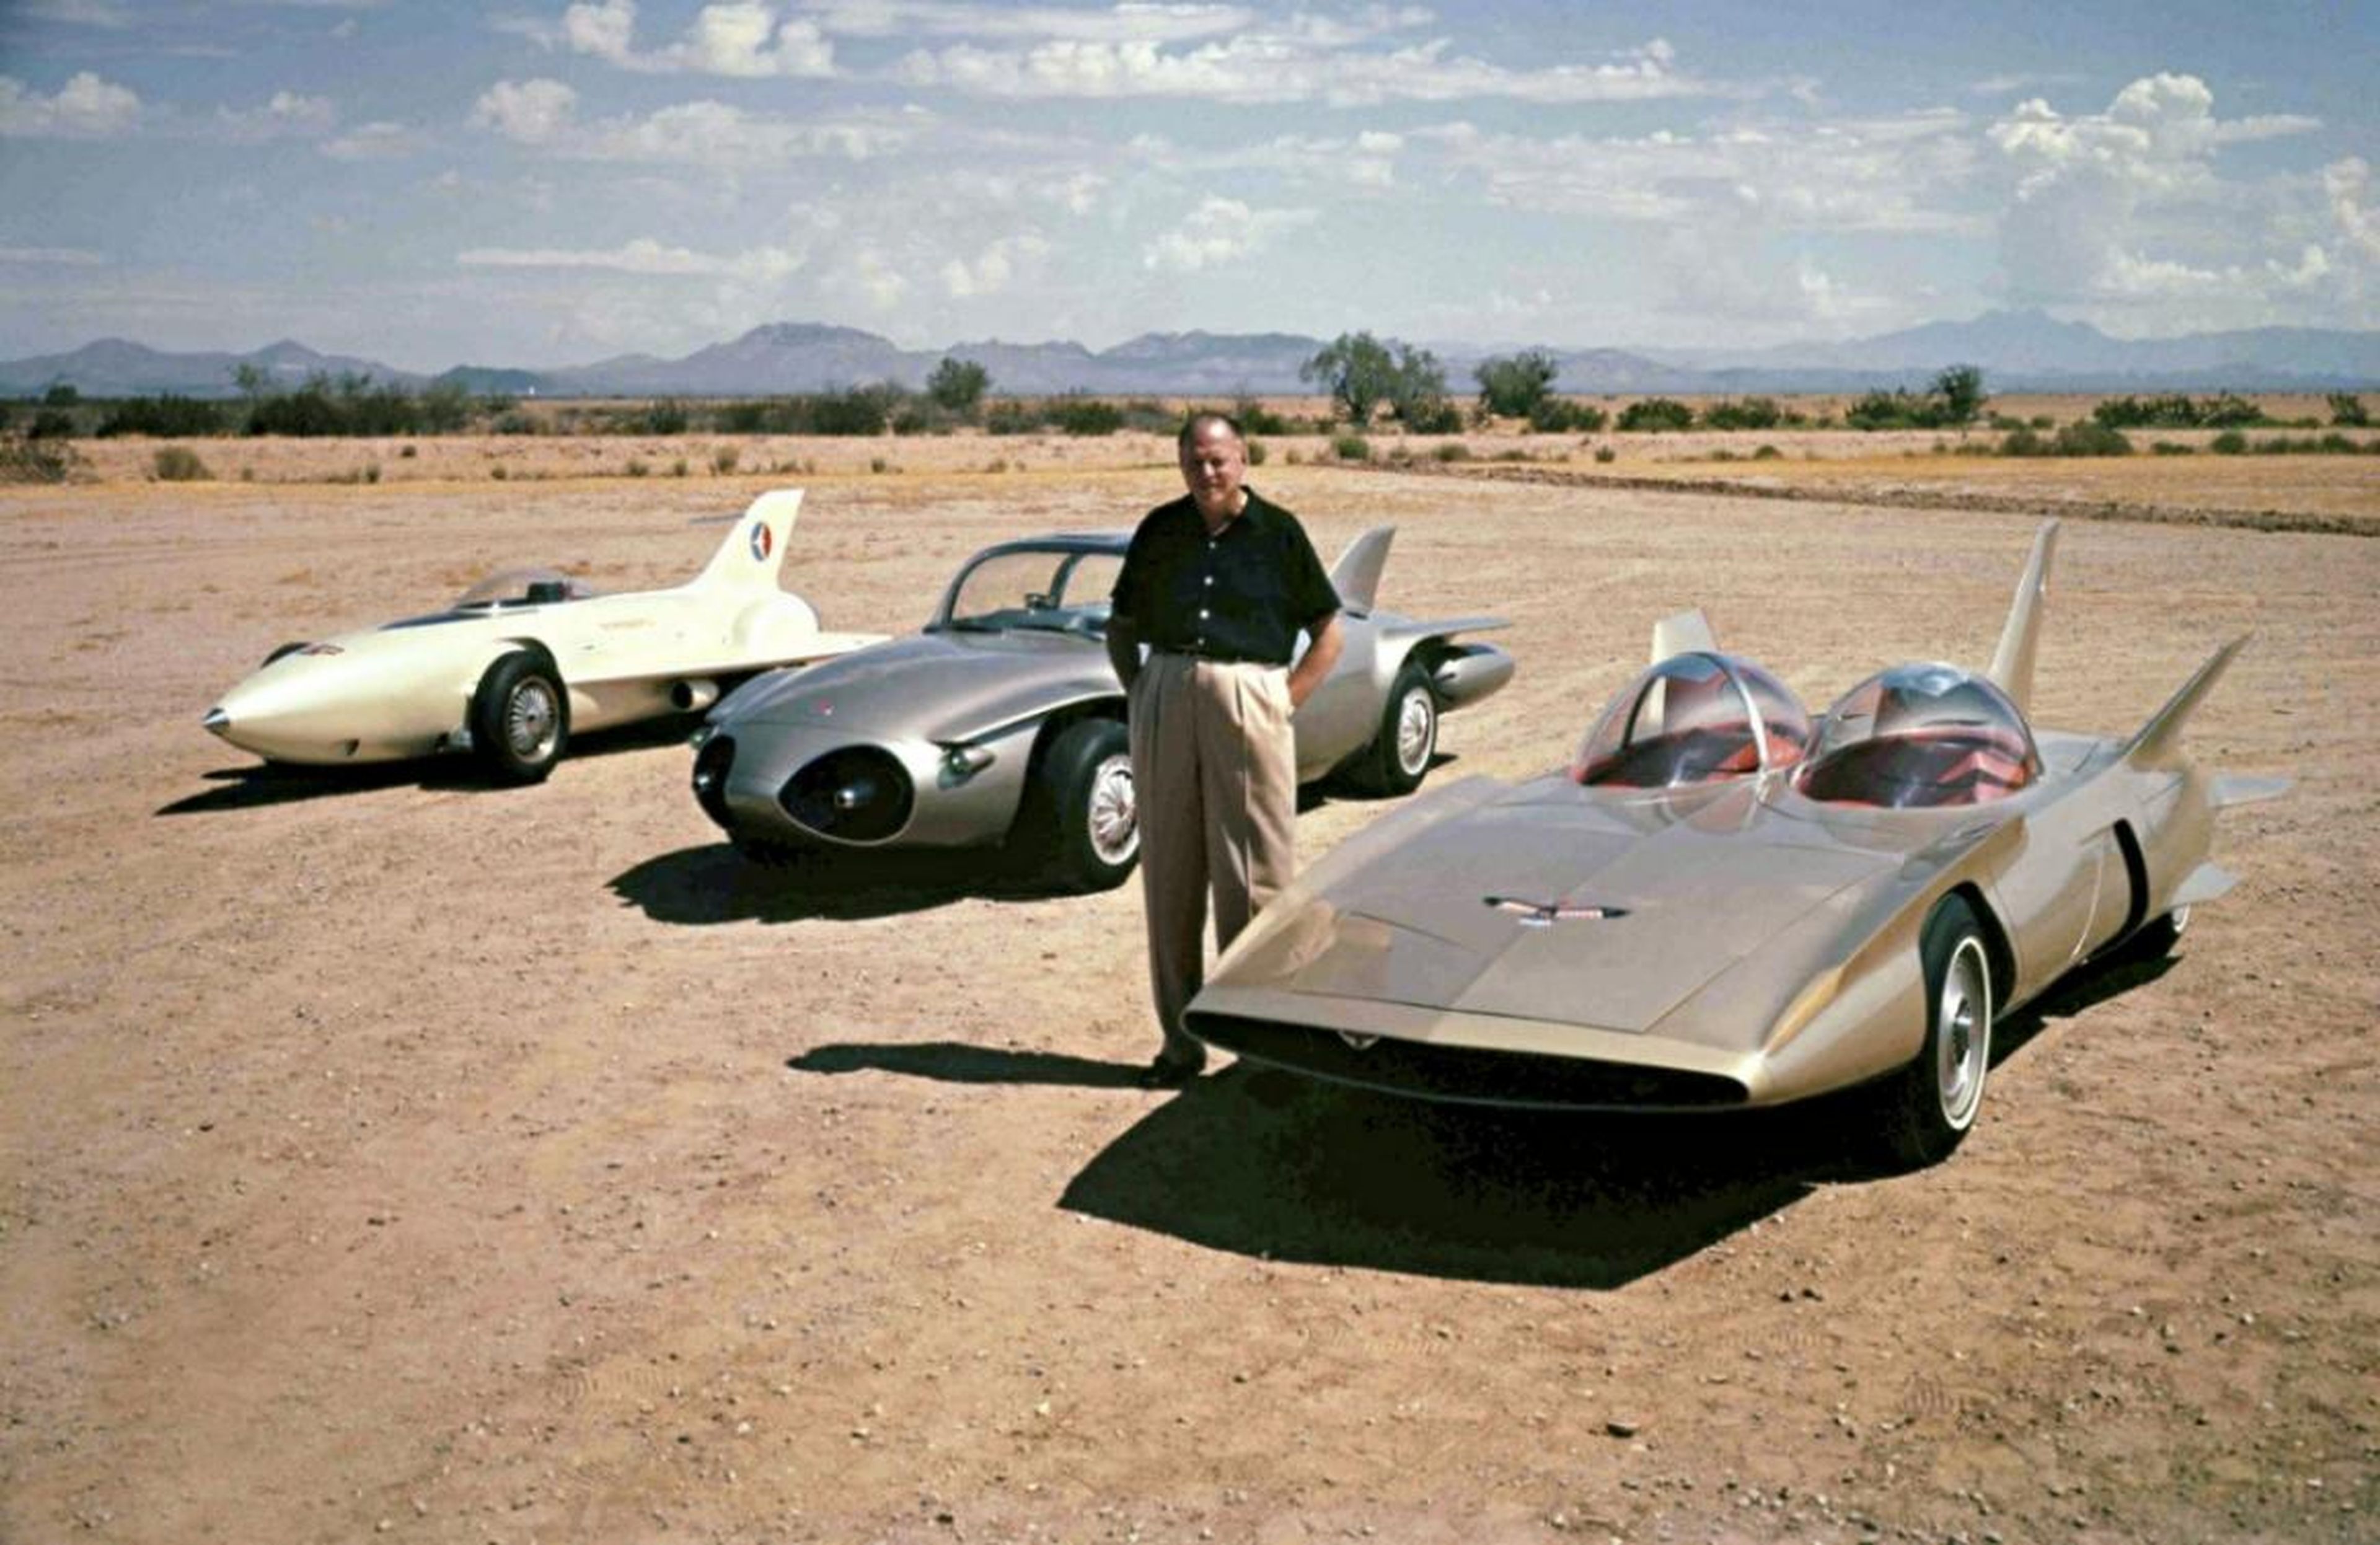 Harley Earl's Dream Cars remind us that it's OK to show extremely out-there designs.